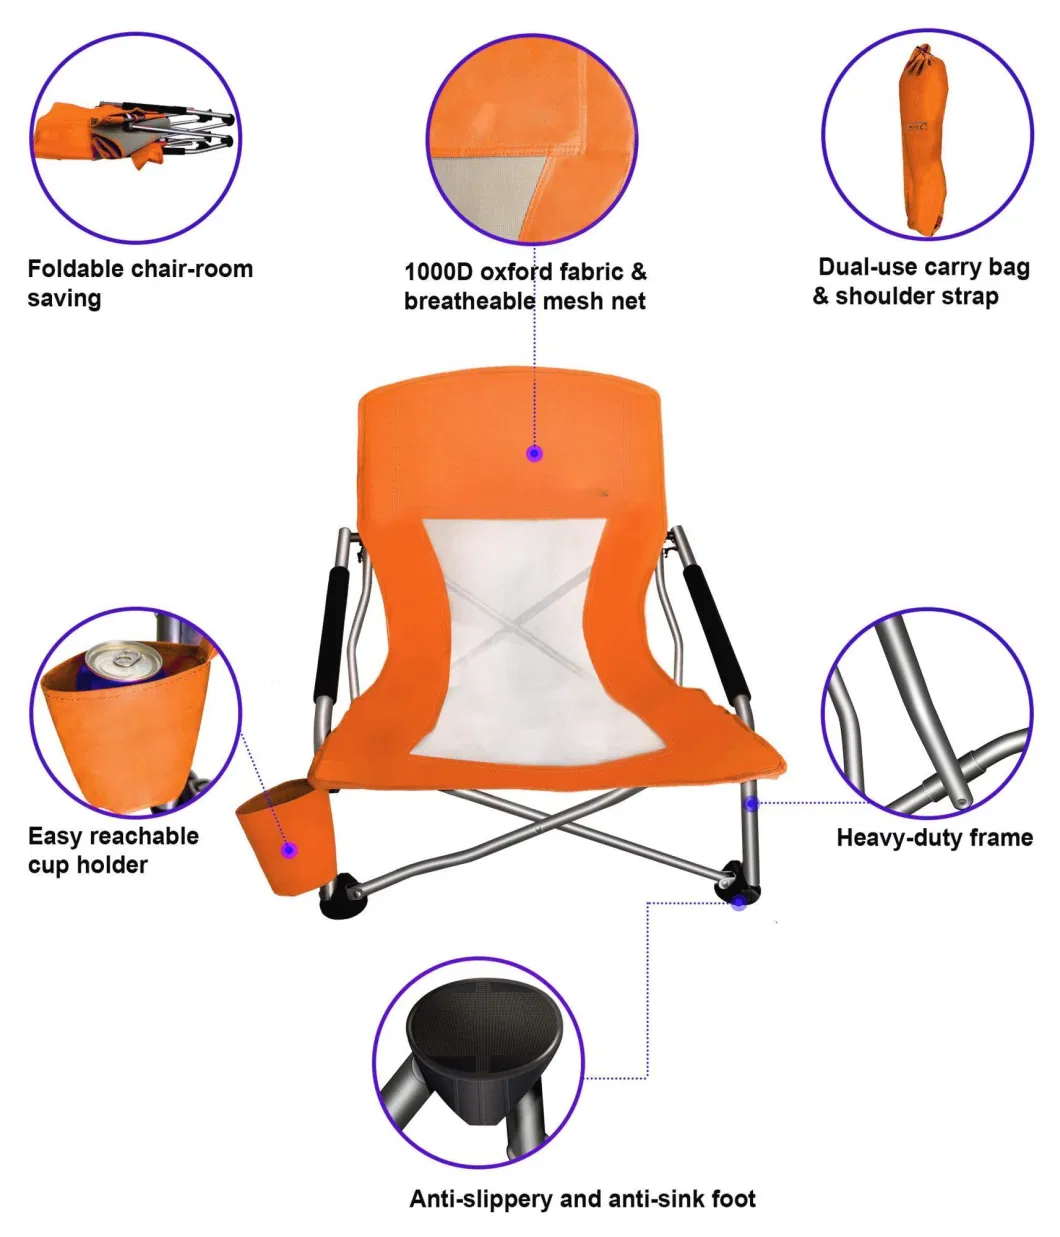 Adults 2 Pack Sling Folding Portable Concert Kids Boat Sand Beach Chair